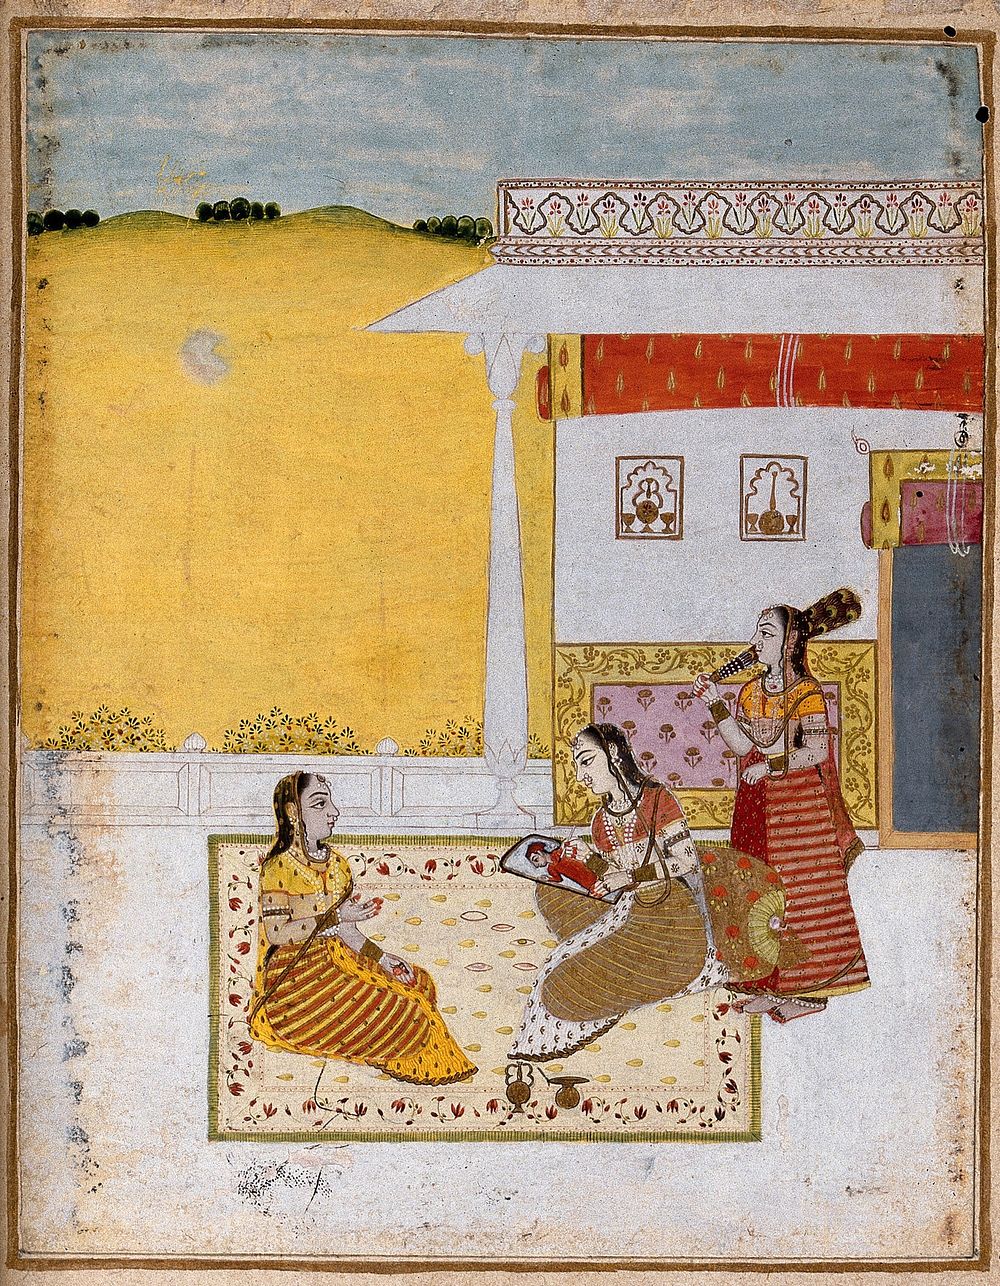 A woman sits on a carpet and paints a portrait of her lover watched by another woman. Gouache painting by an Indian painter.